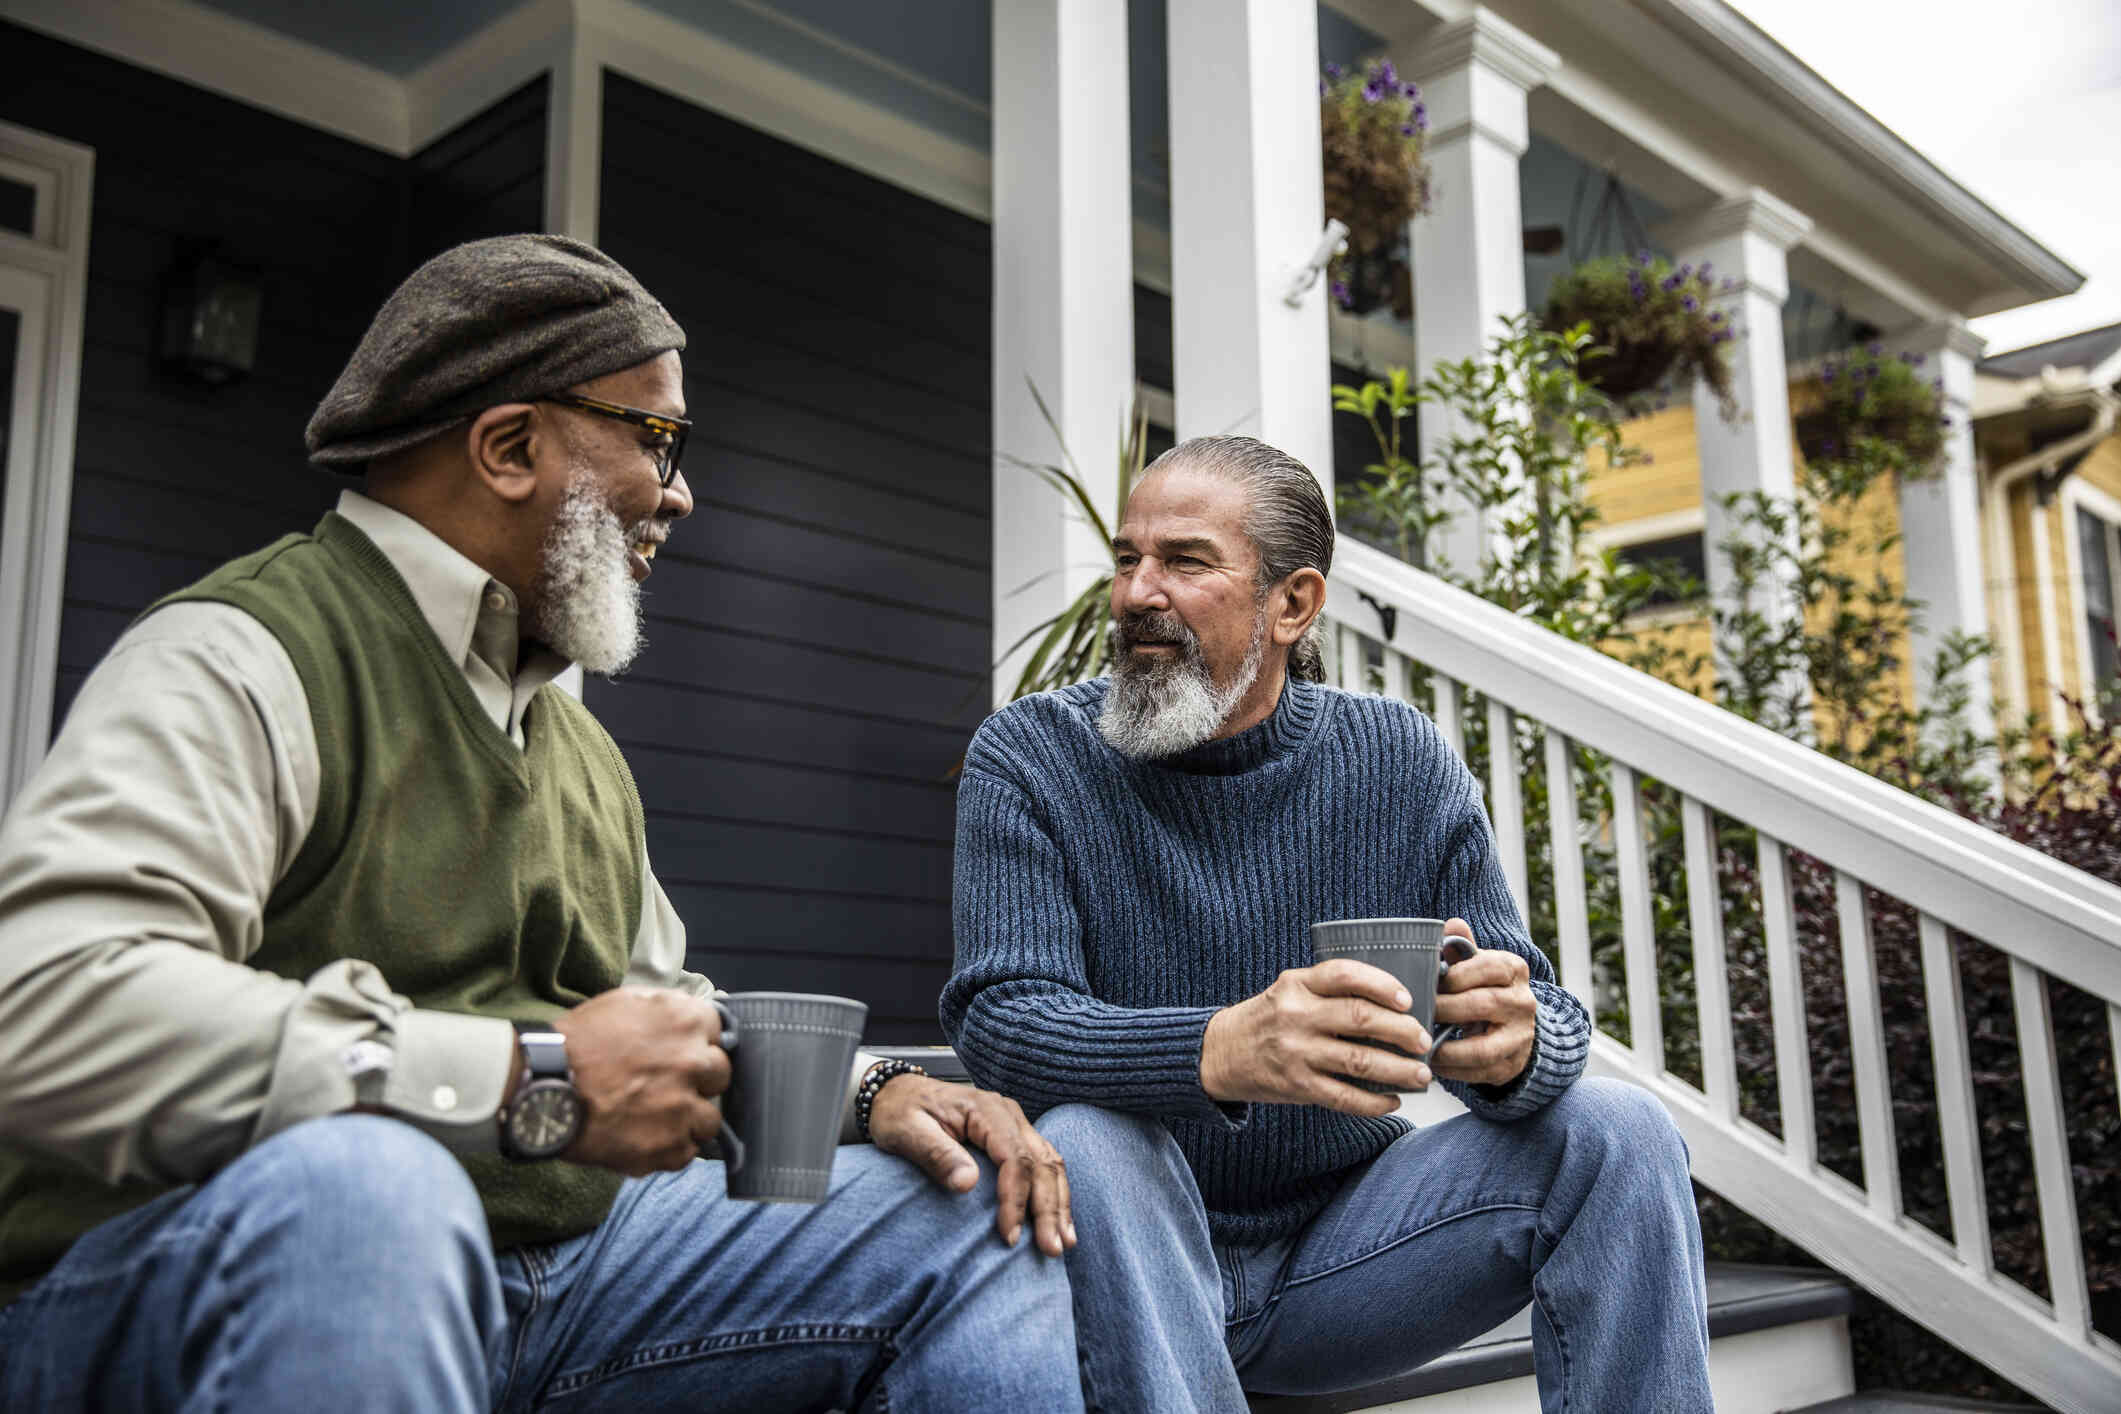 Two middle aged men sit side by side on the front porch steps and chat while smiling and holding coffee cups.